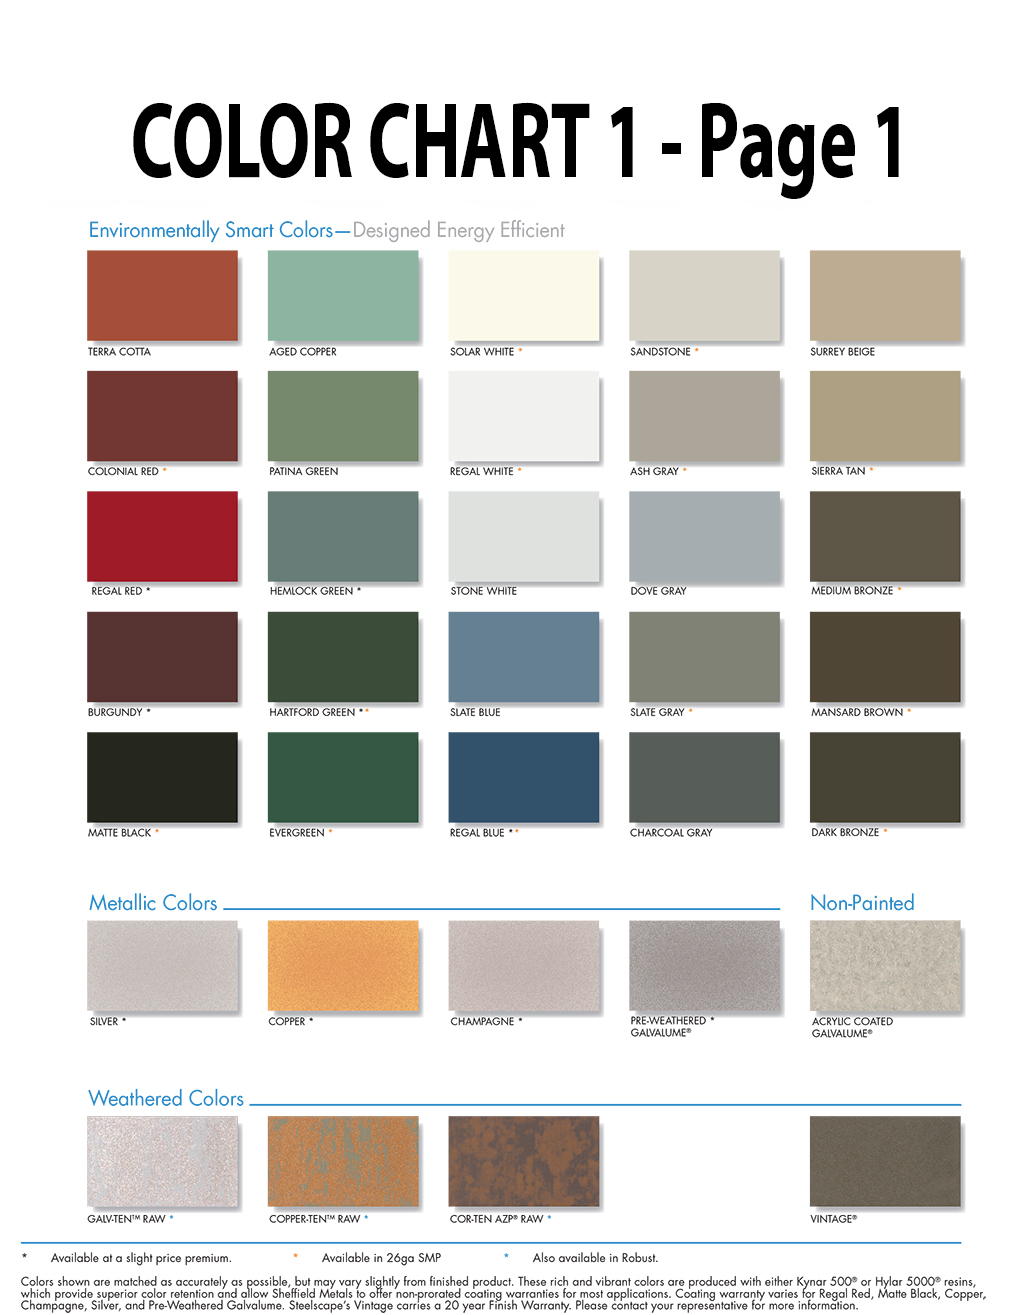 Calebs Roofing - Metal Roofing Colors - Commercial Roofing